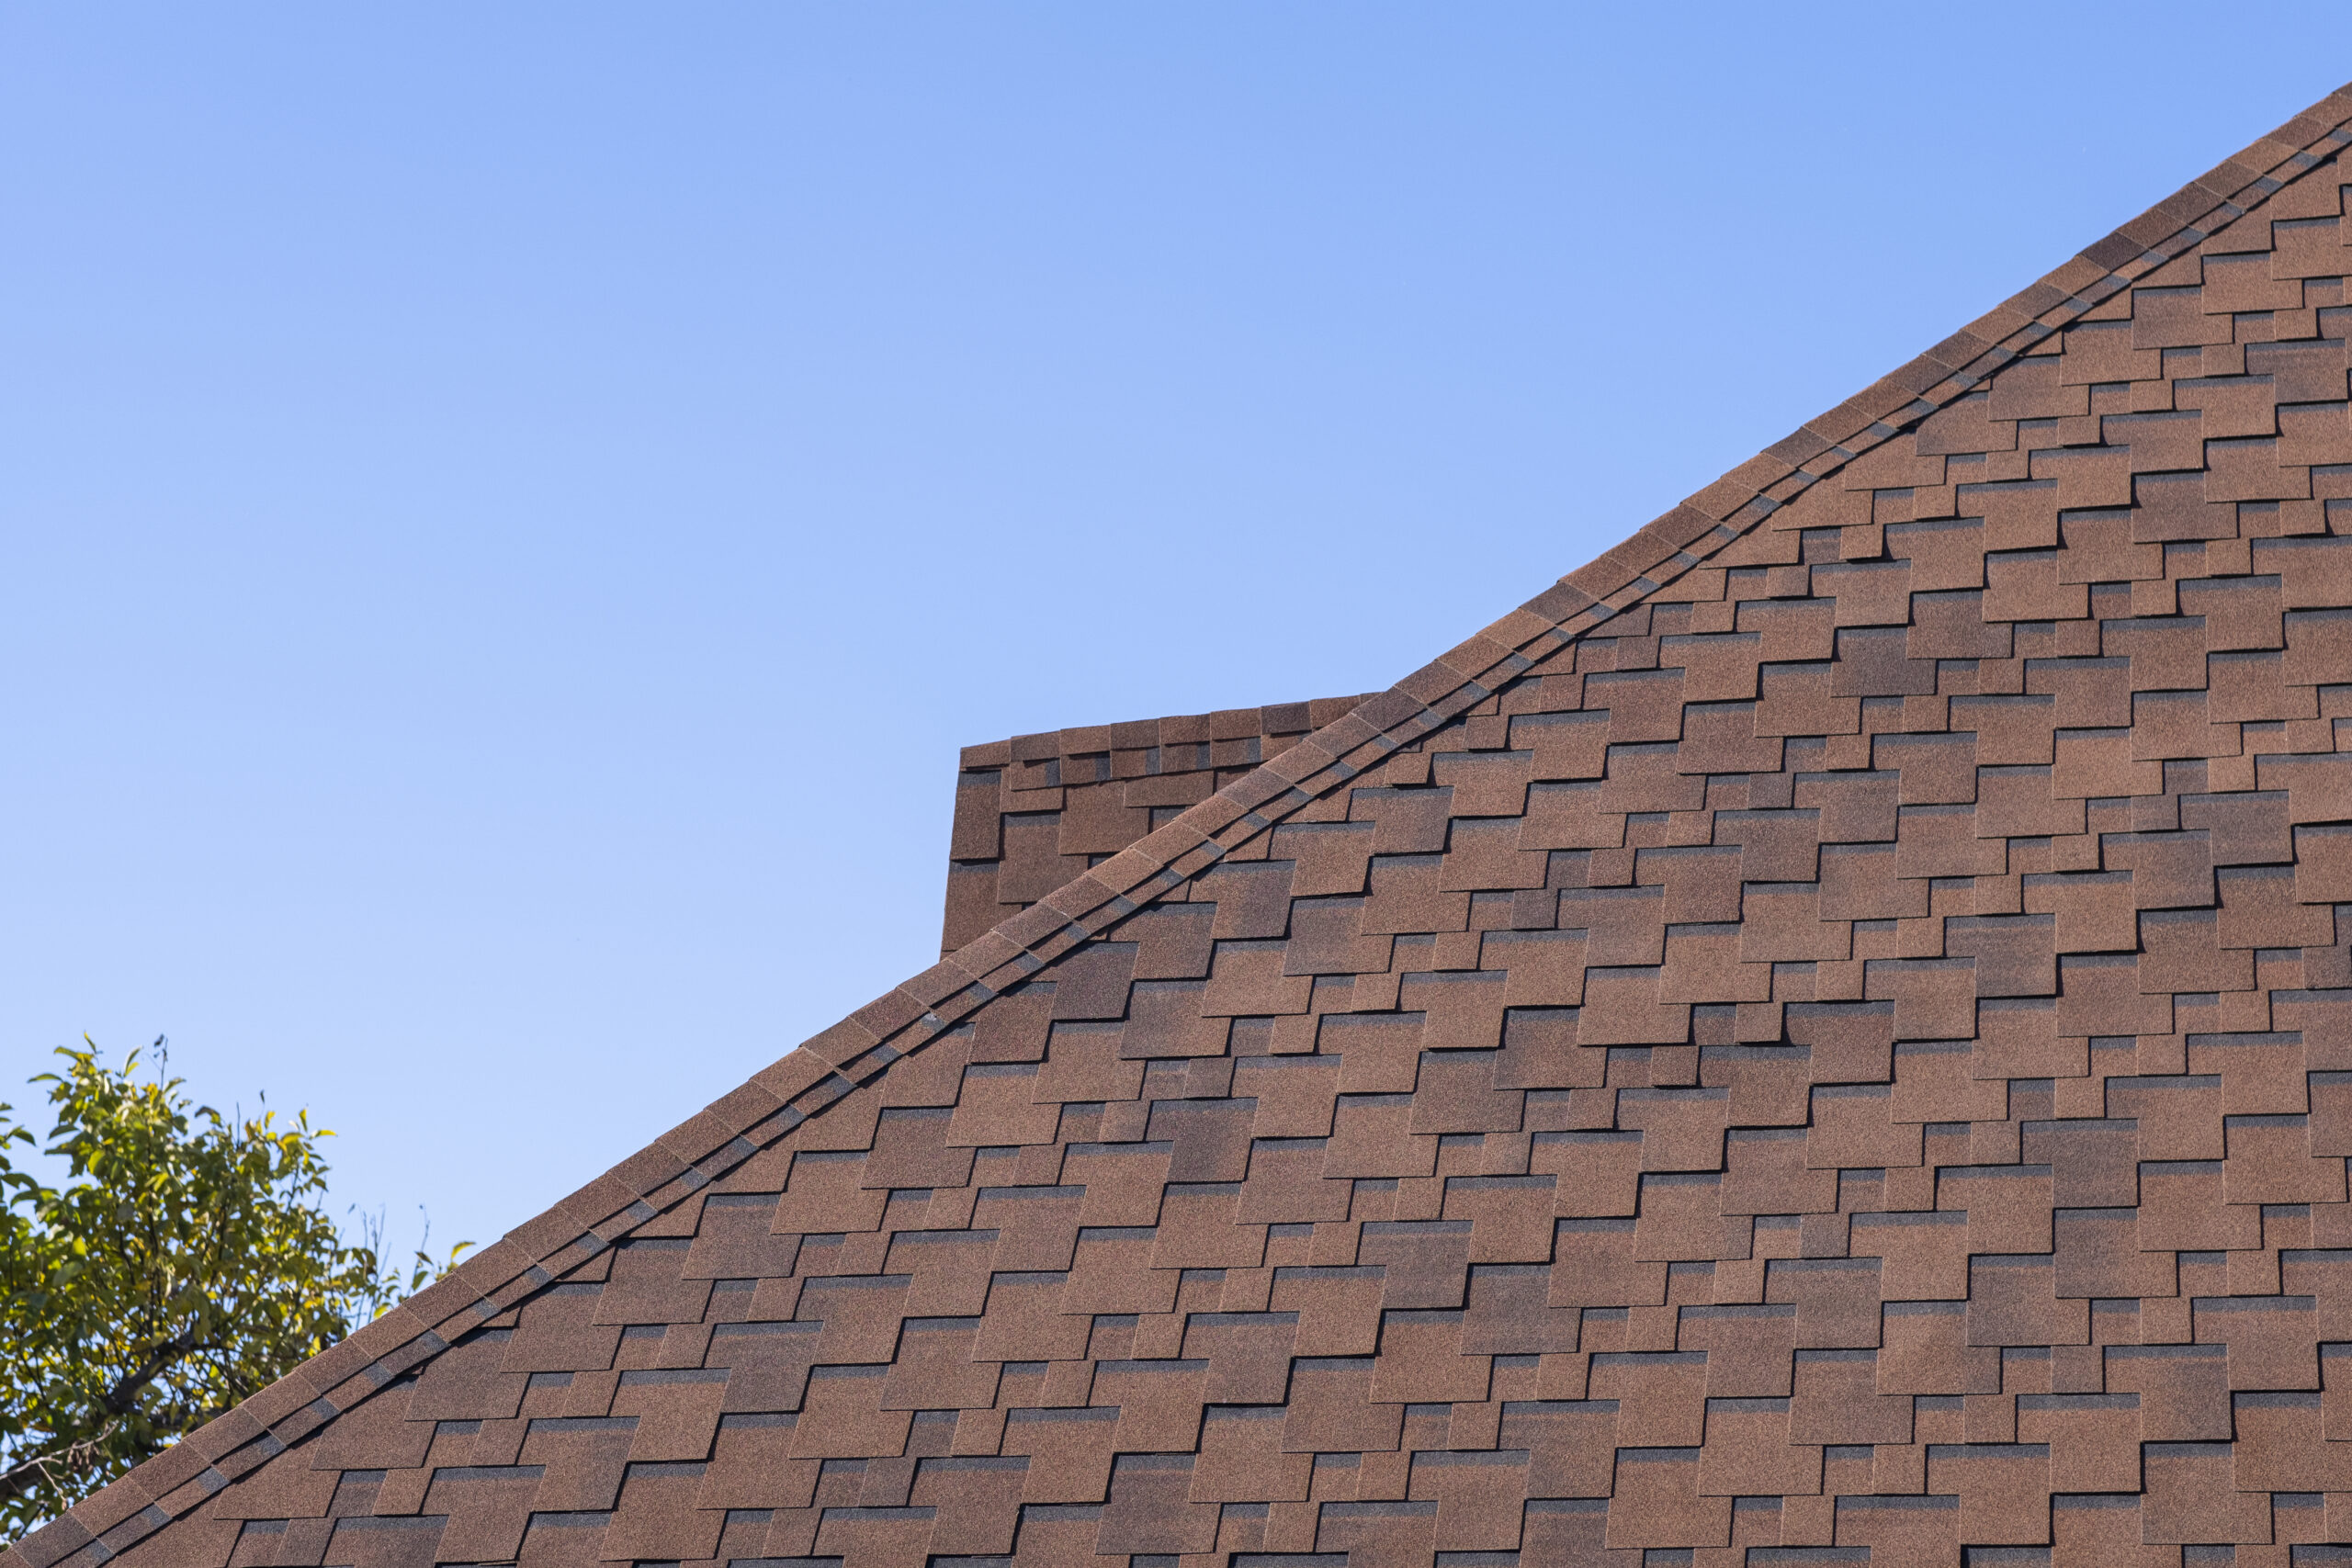 The Roof Is Made Of Brown Bituminous Tiles.